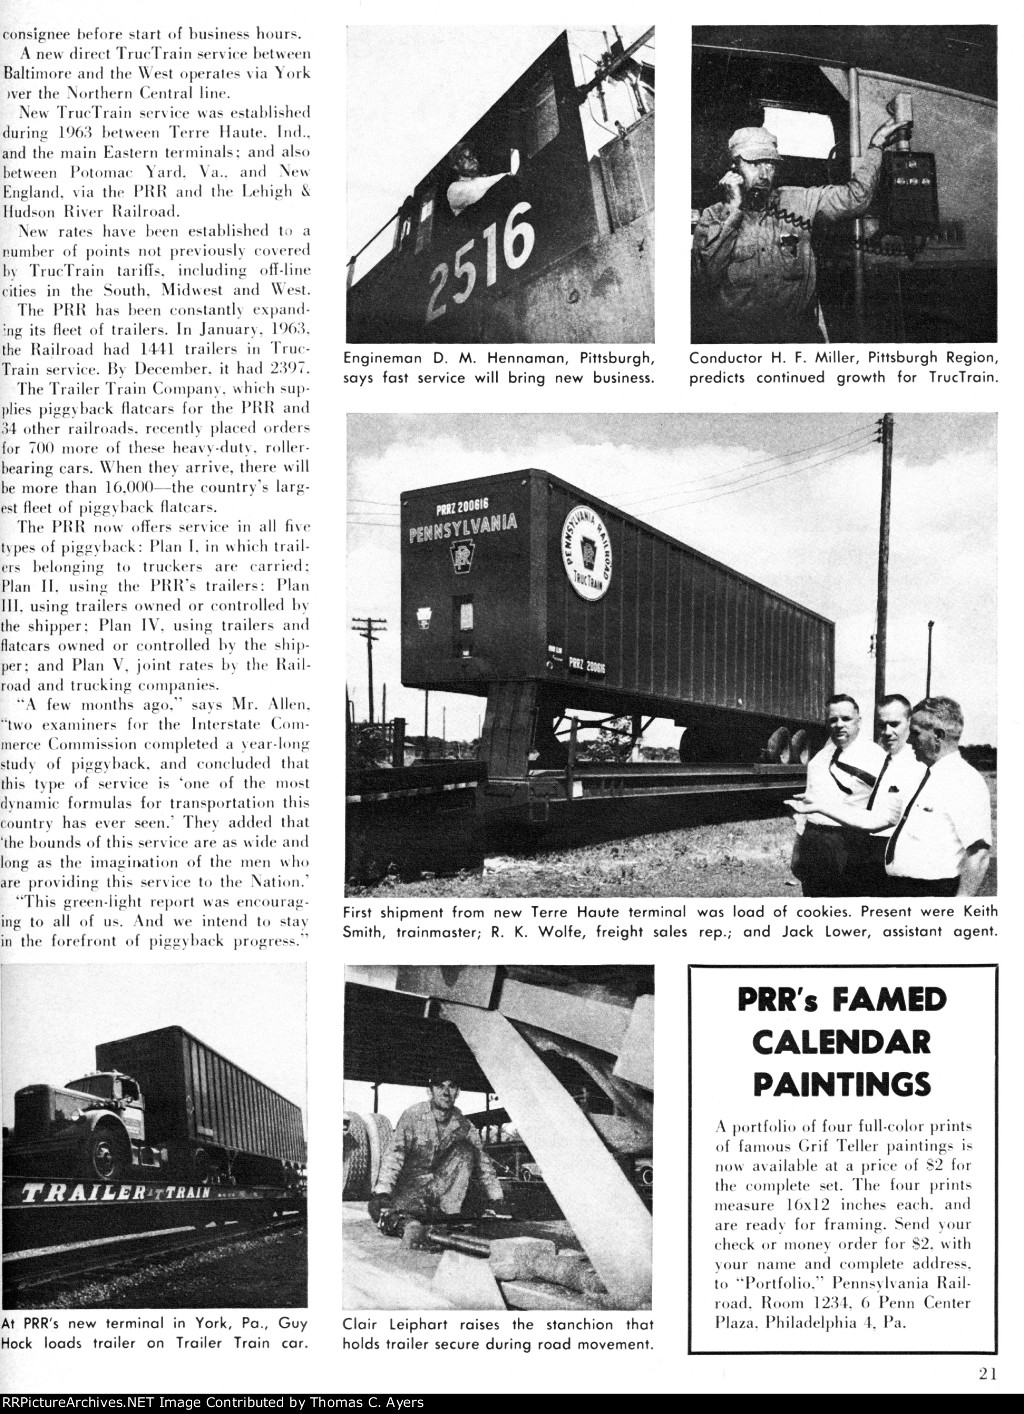 "TrucTrain," Page 21, 1964